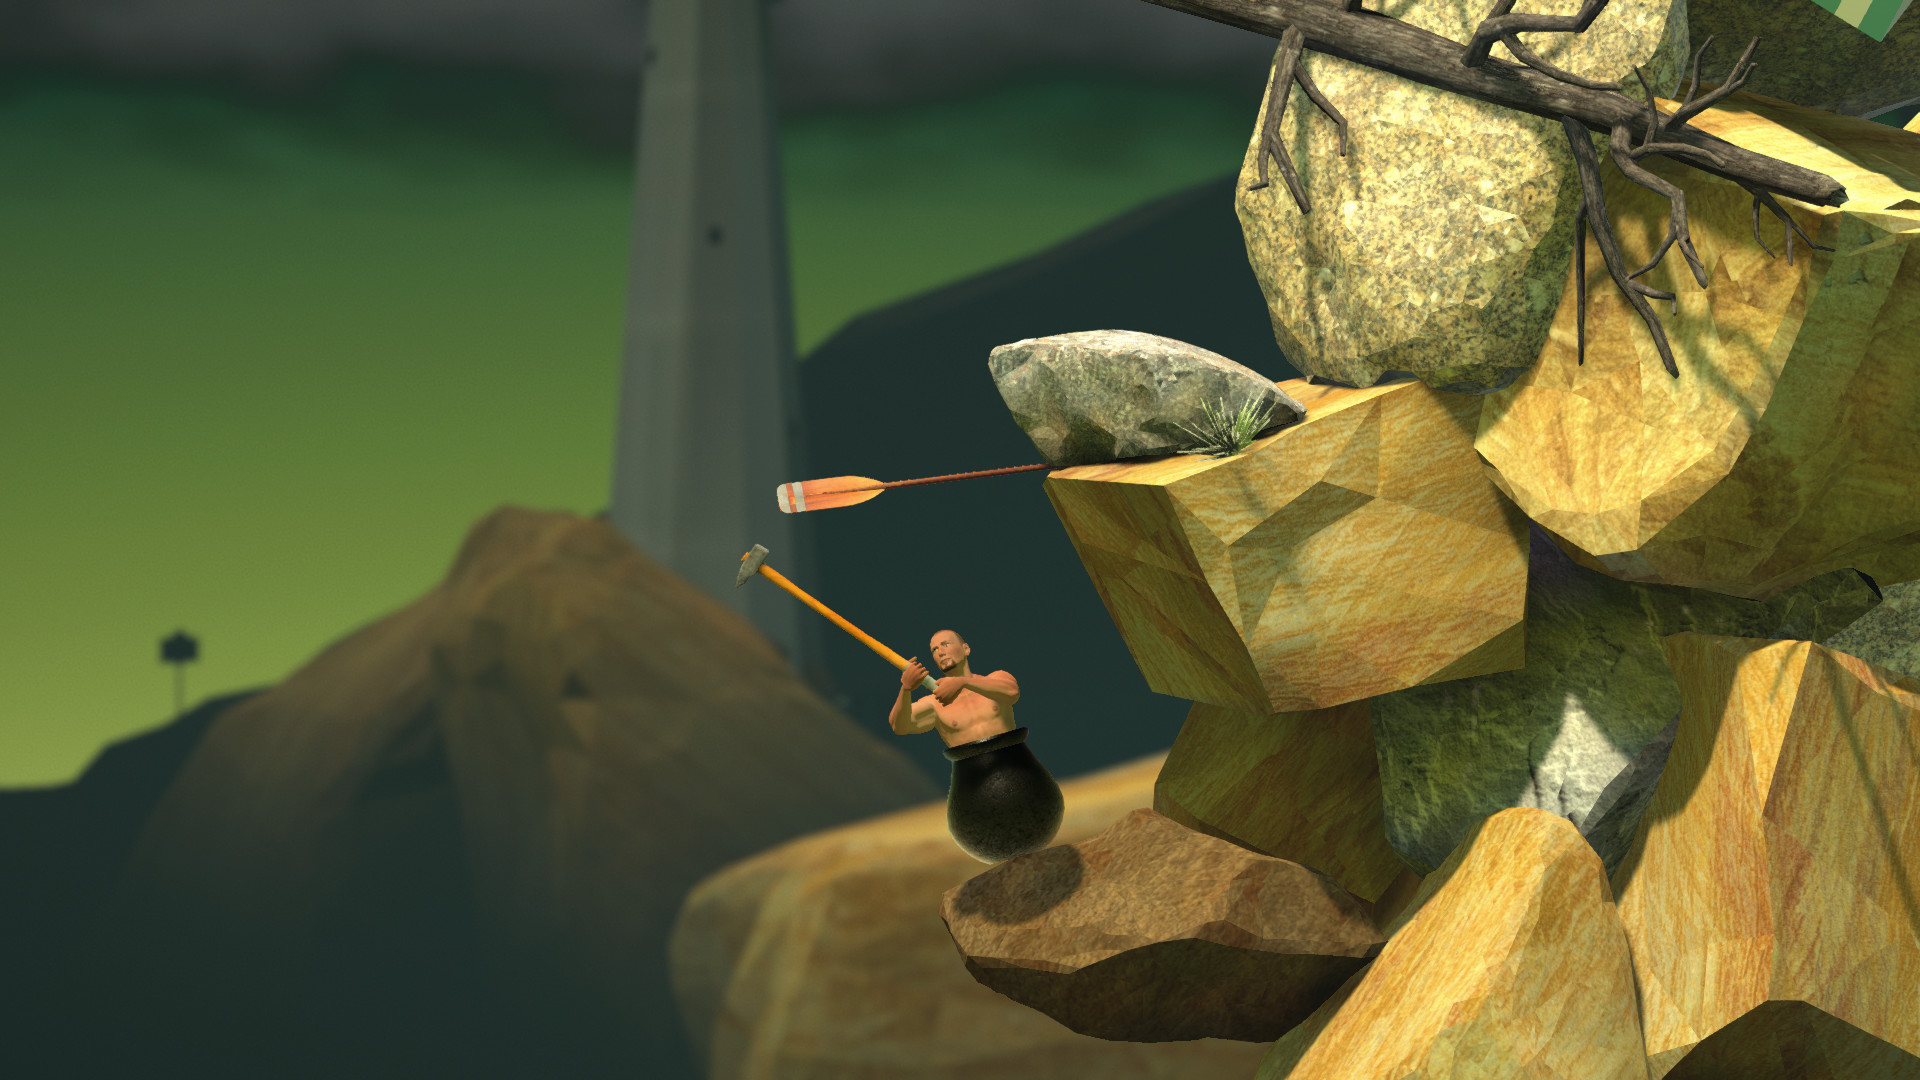 Getting Over It with Bennett Foddy screenshot